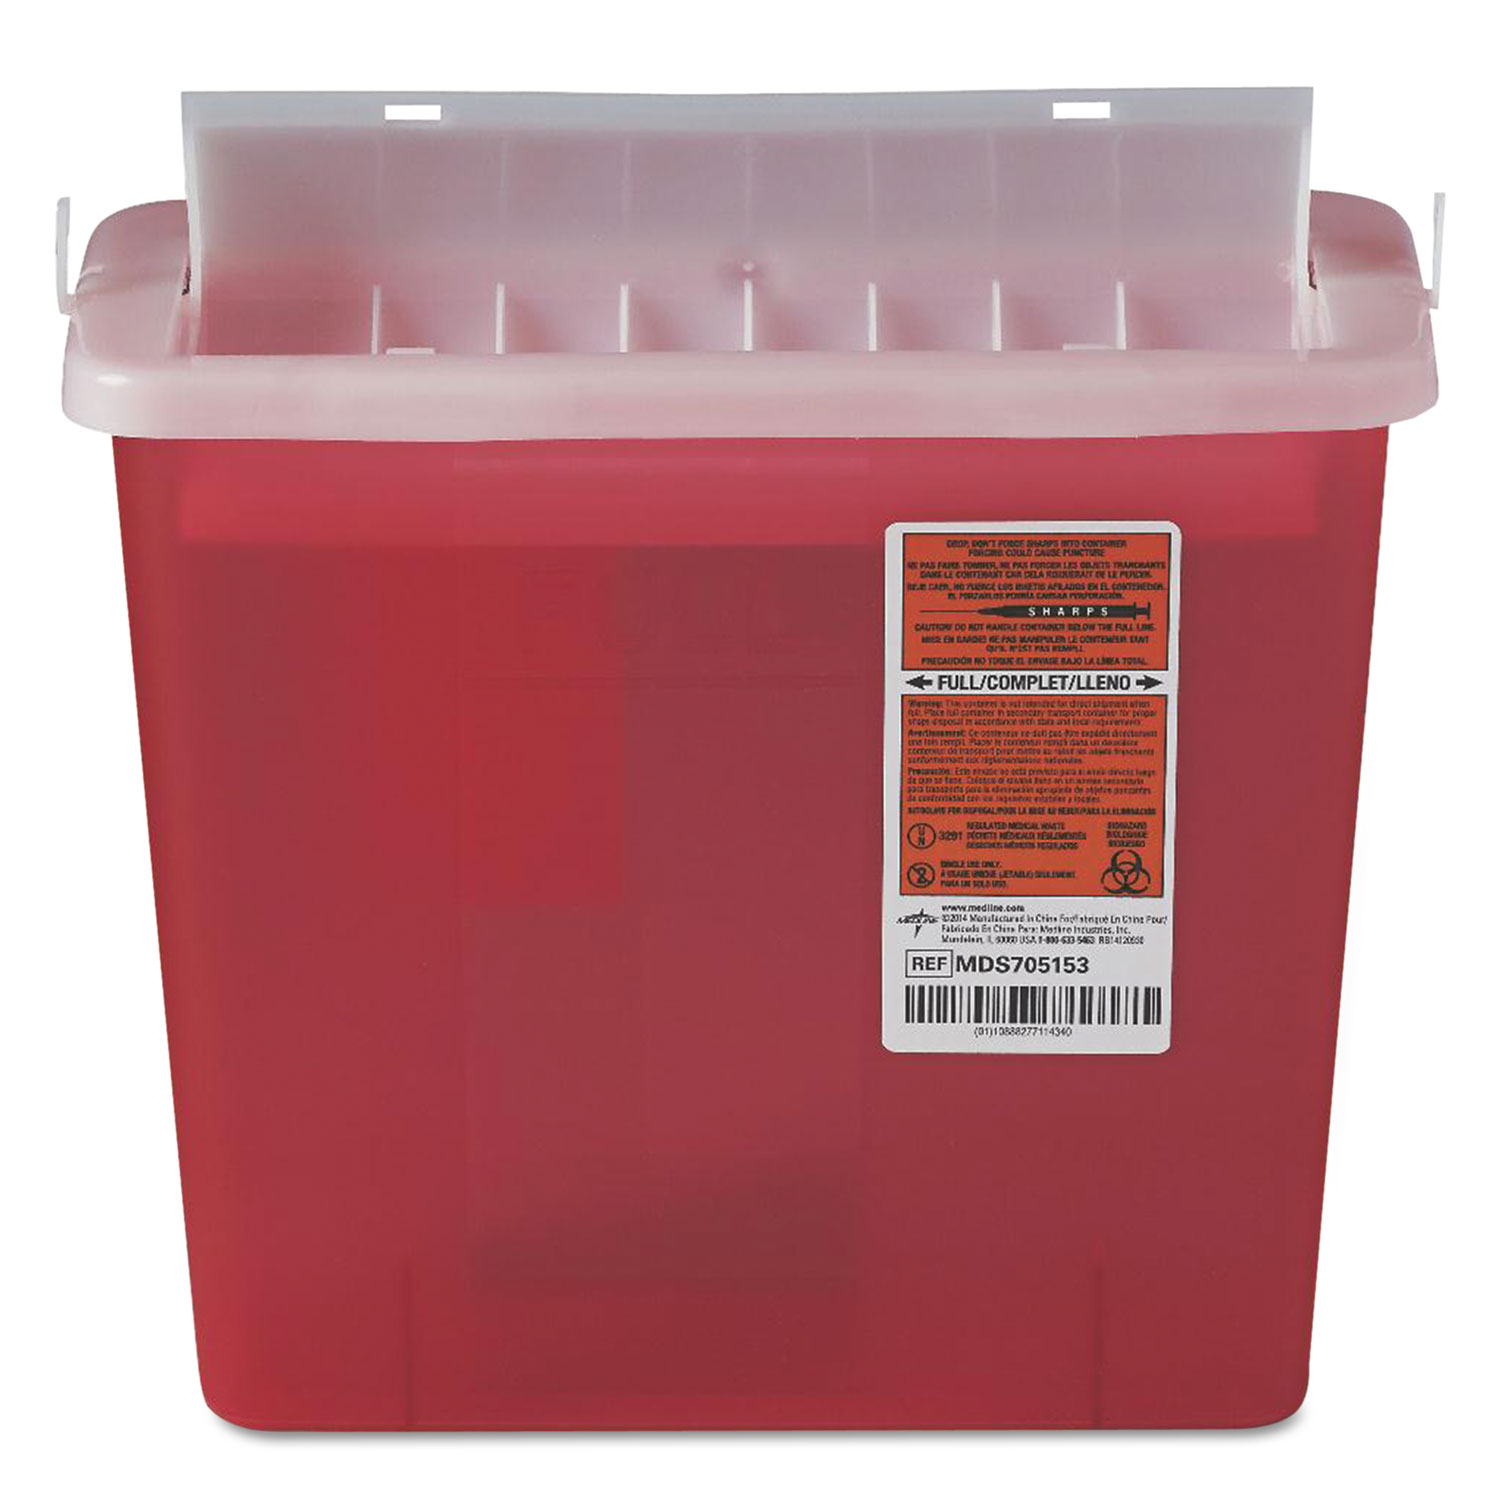  Medline MDS705152H Sharps Container for Patient Room, Plastic, 5 qt, Rectangular, Red (MIIMDS705153H) 